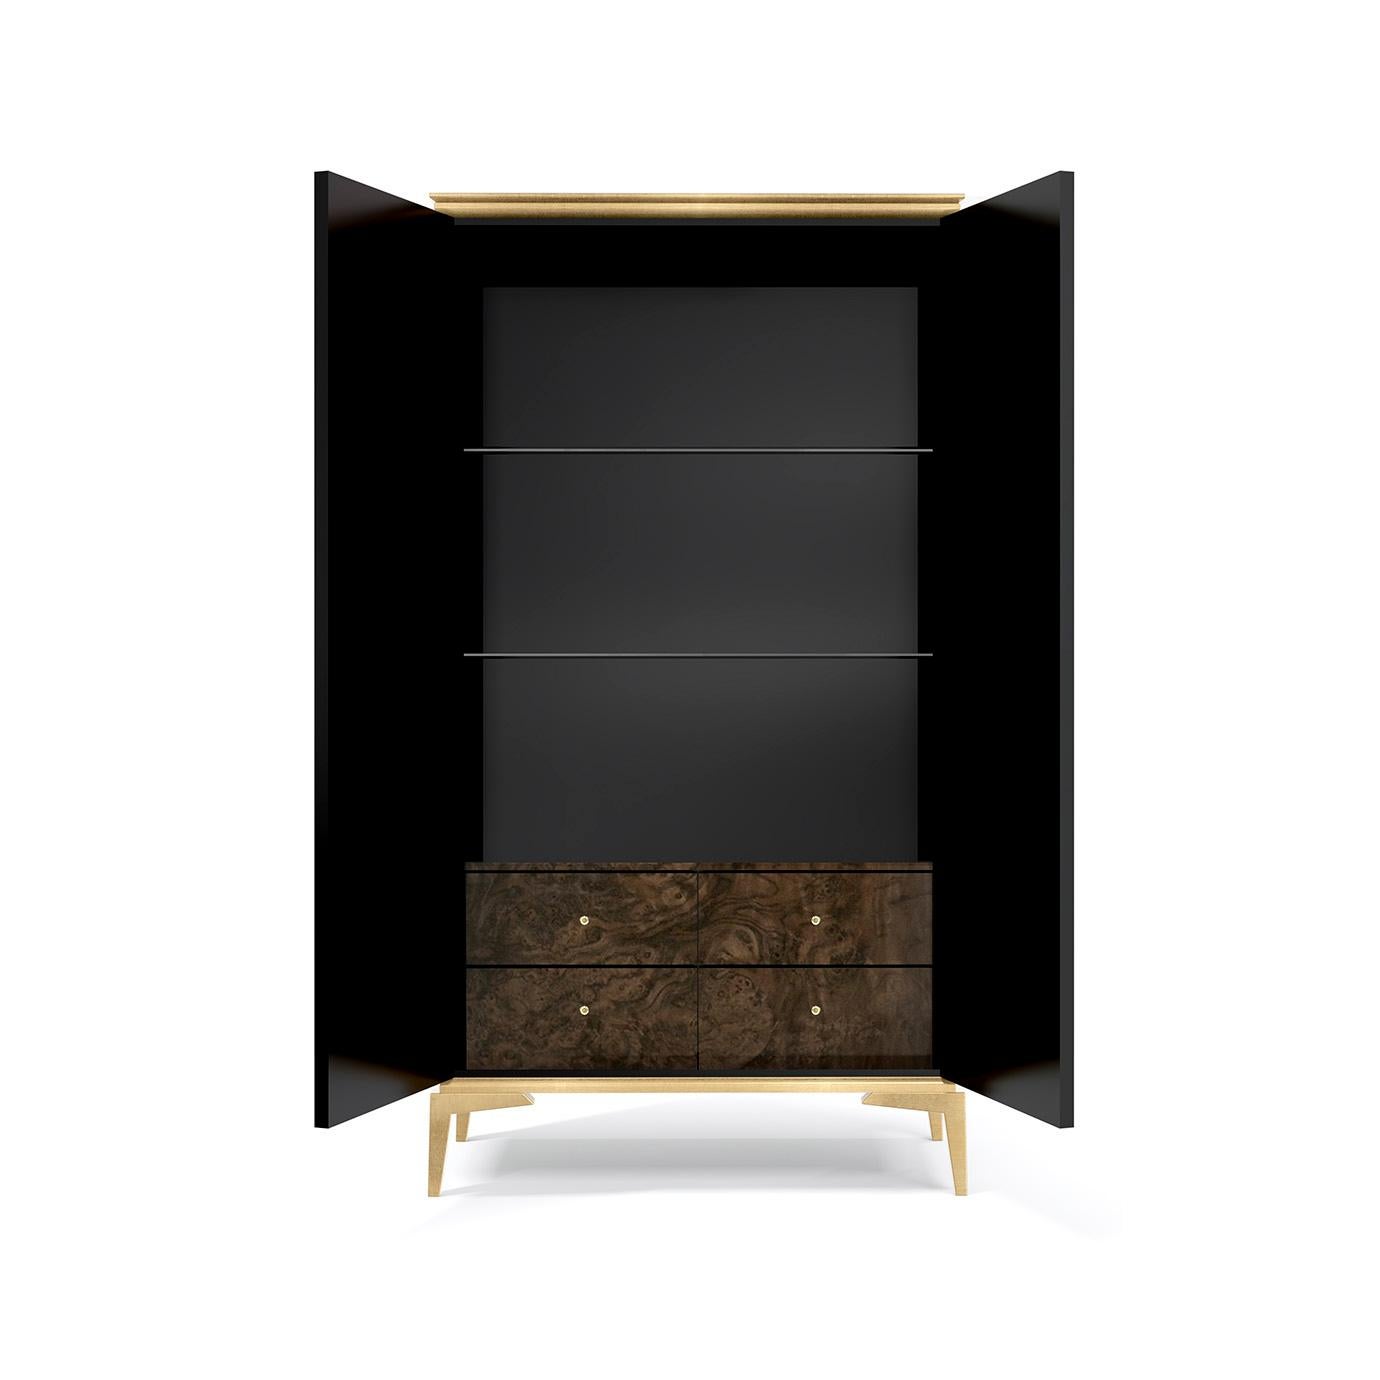 Inspired by the exotic allure of the South Asian country for which it is named after, the India Armoire at once mysteriously entices and induces a sense of warm comfort. Adorned with striking antique brass snake pulls, made using the ancient craft